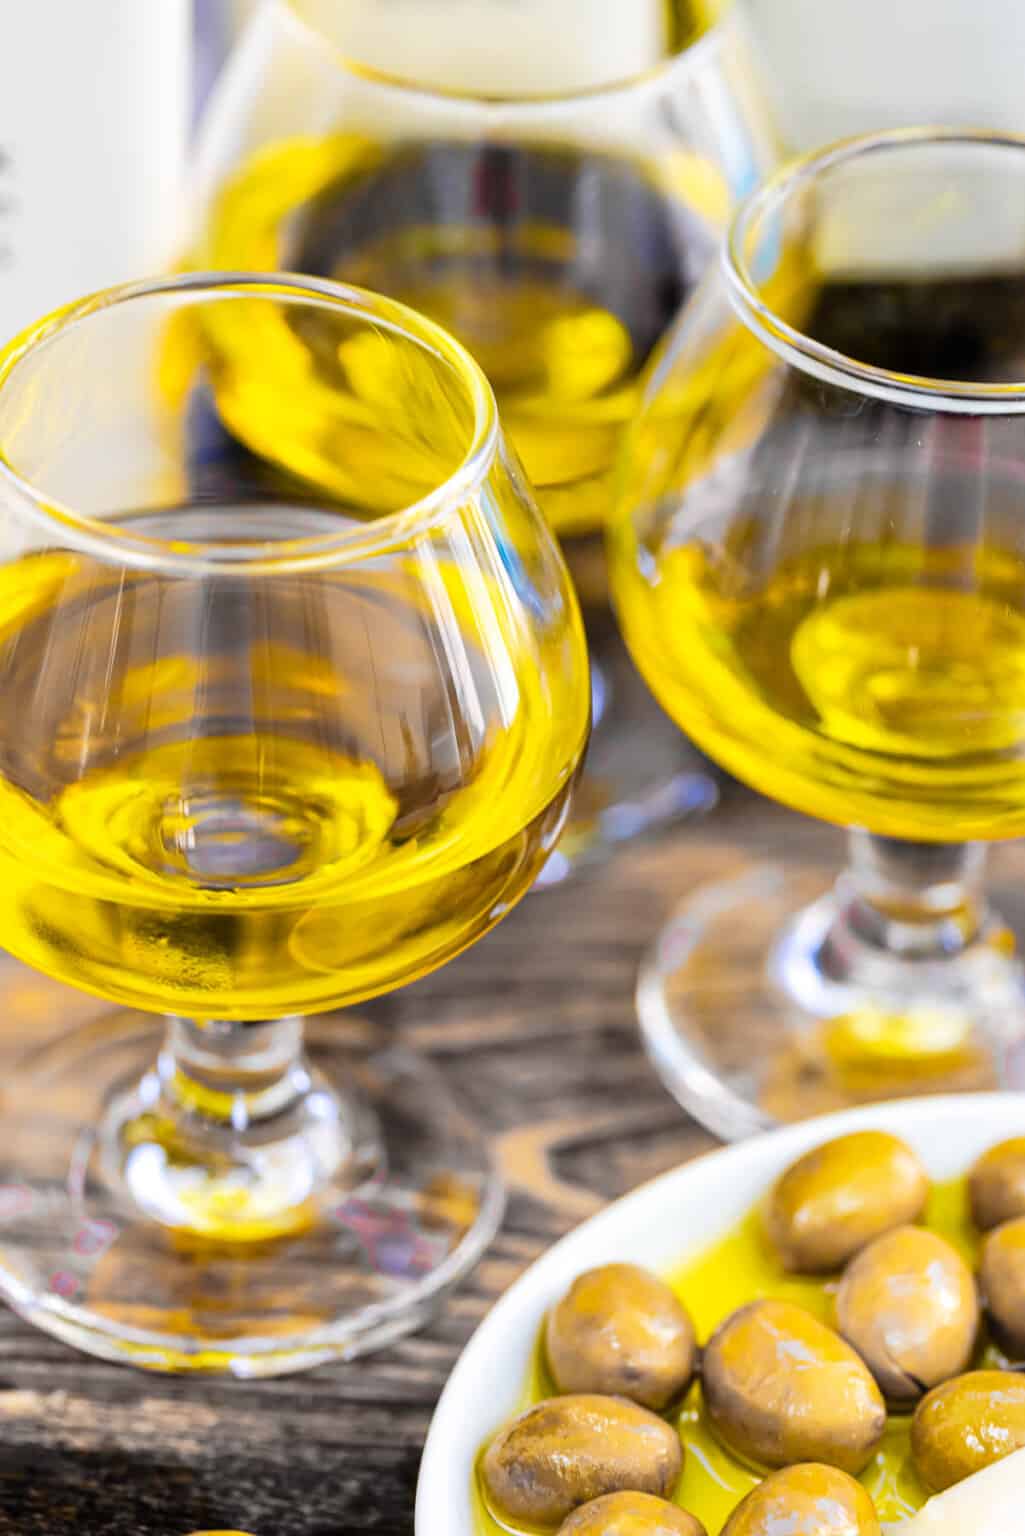 How to Taste Olive Oil | The Mediterranean Dish